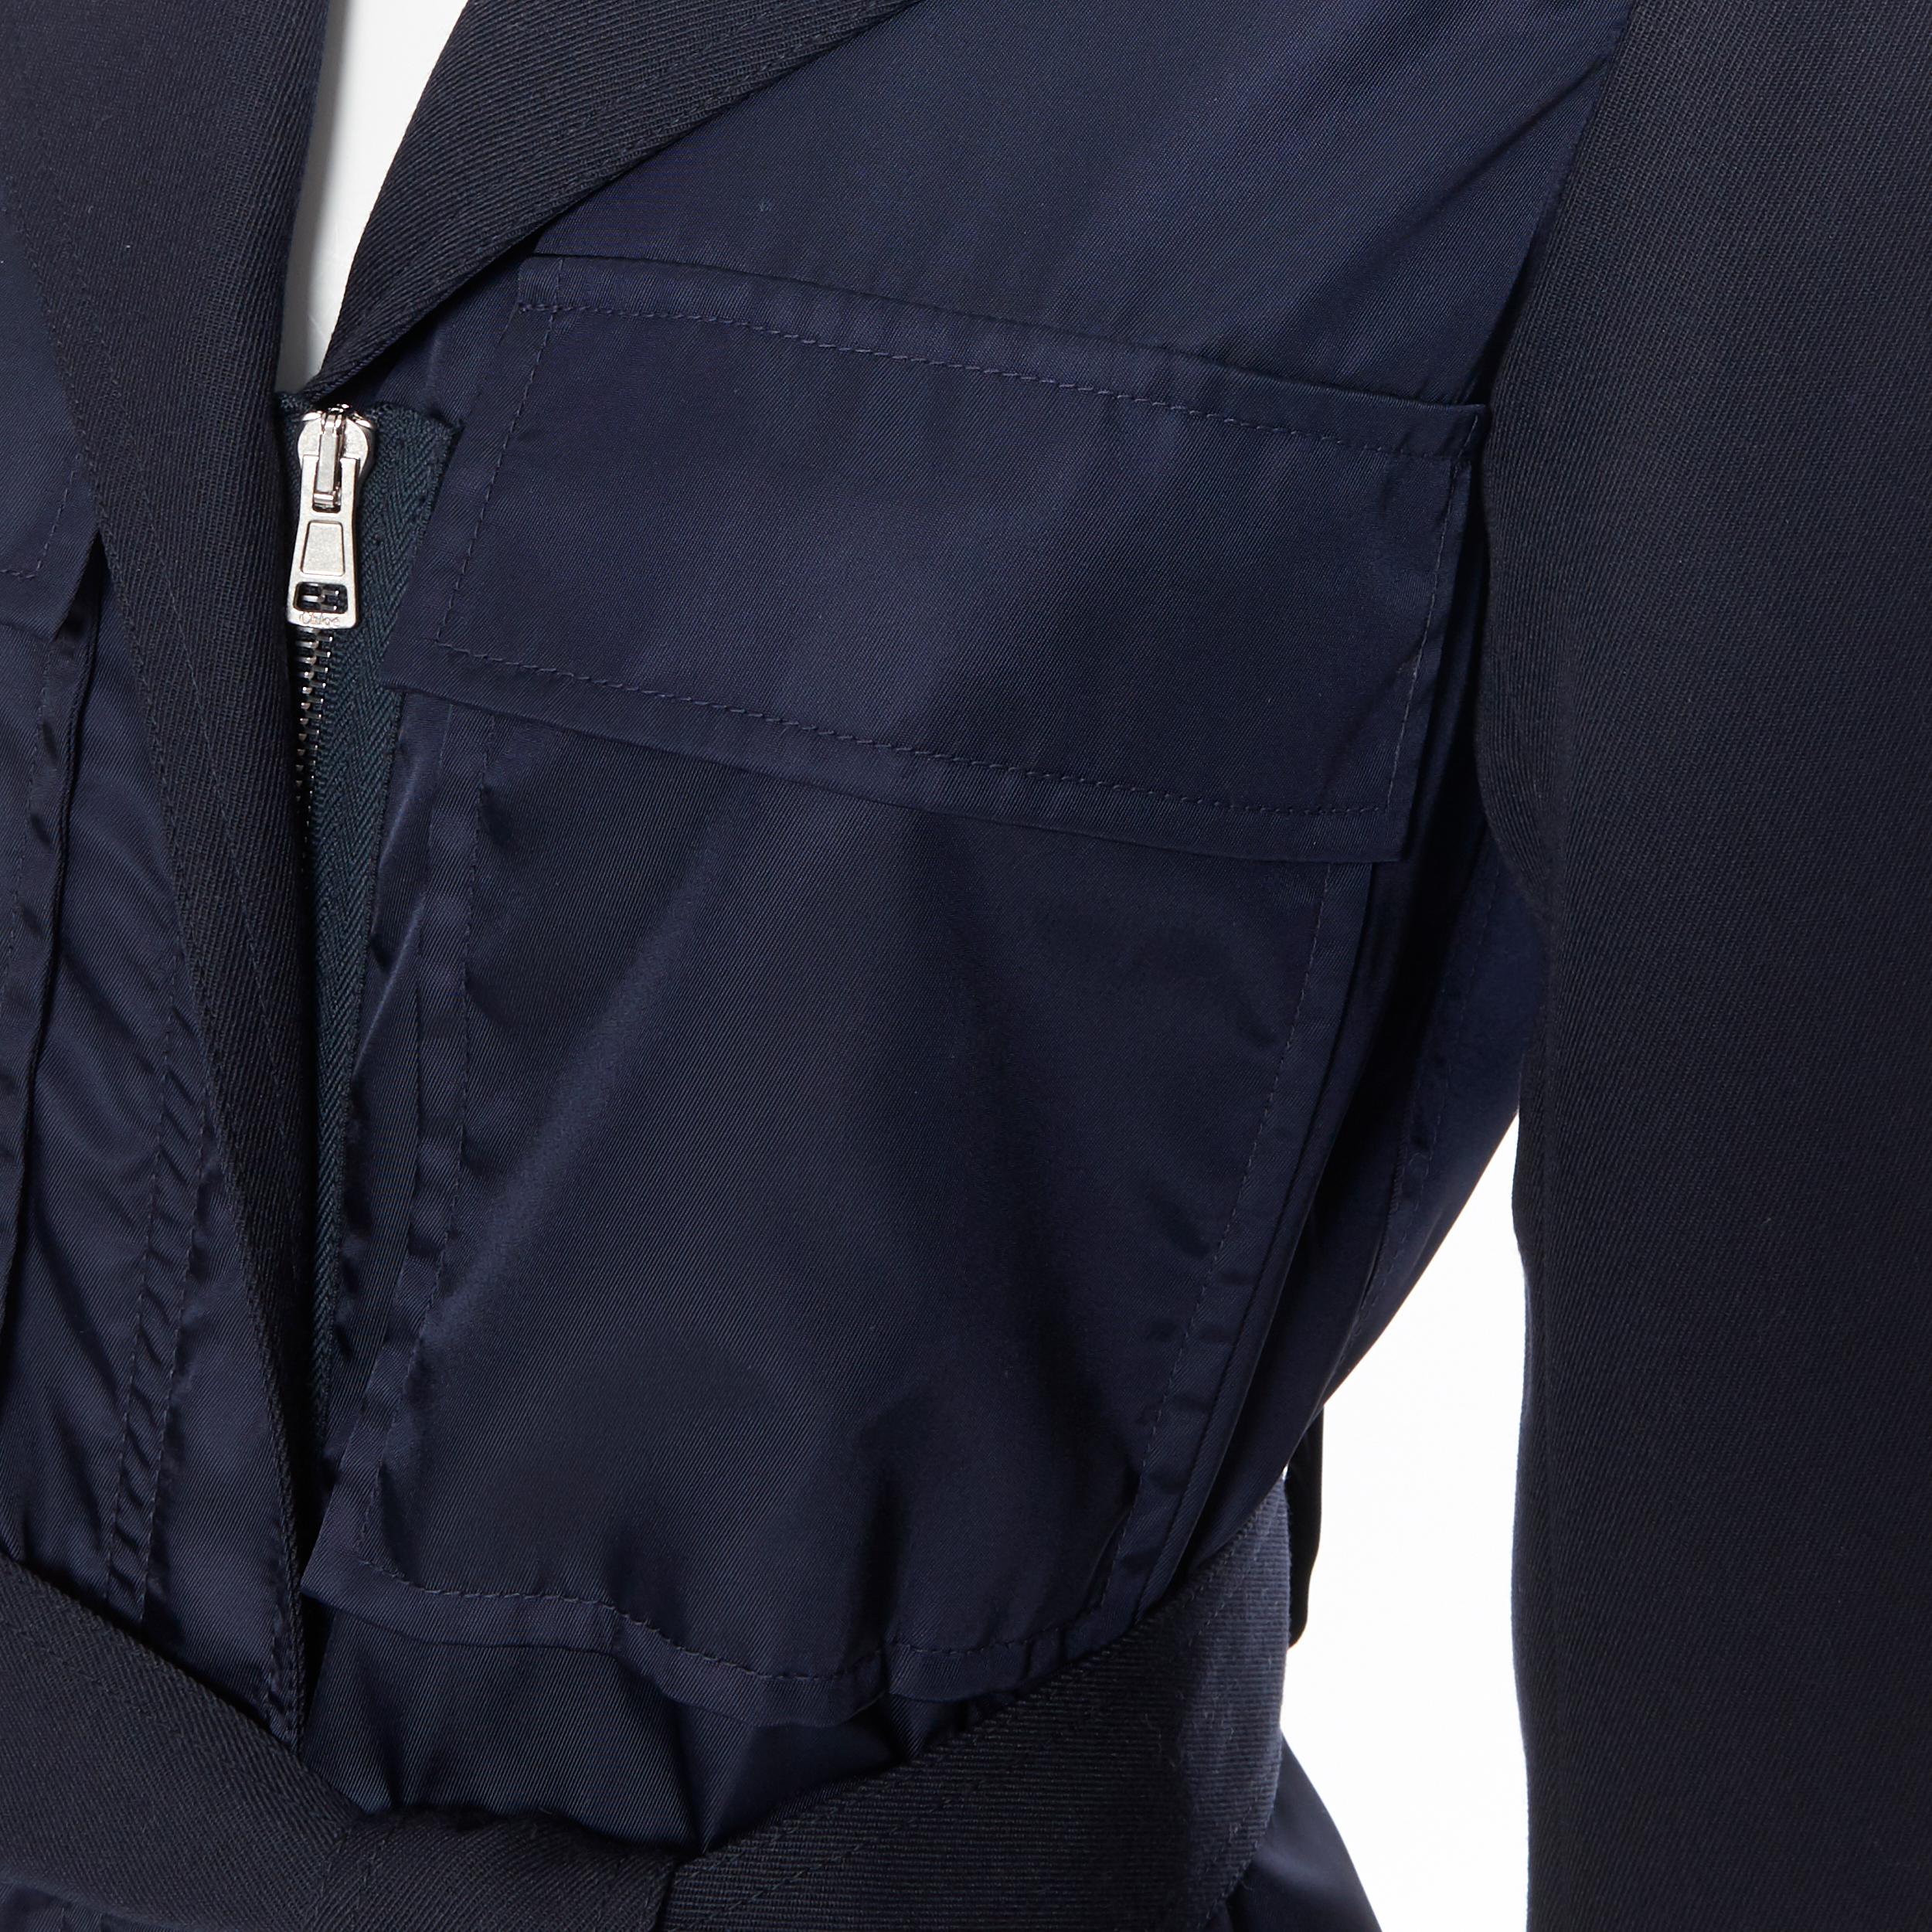 new CHLOE 2018 Iconic Navy contrast bodice safari pocket belted jacket FR34 XS
Brand: Chloe
Collection: 2018
Model Name / Style: Belted jacket
Material: Polyester
Color: Navy
Pattern: Solid
Closure: Zip
Extra Detail: Detachable belt. Flap pocket